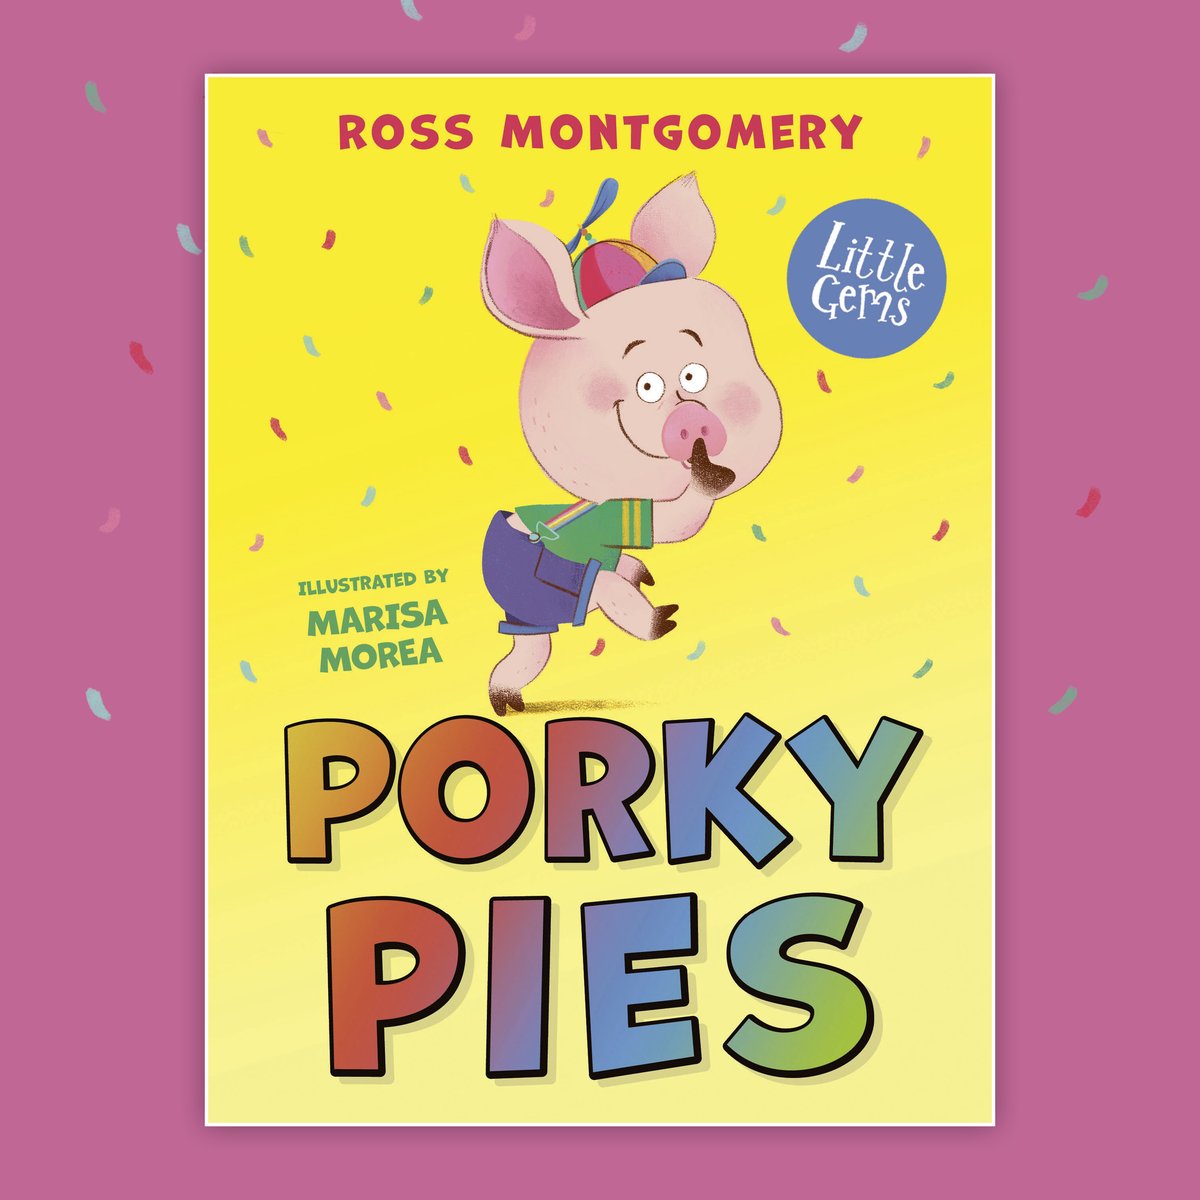 Porky Pies is always telling lies. But when the biggest fibber in the litter tries to plan his most daring prank yet, who will have the last laugh? A hilarious fairytale twist from @mossmontmomery and @marisa_morea. bit.ly/3Ua6NcG